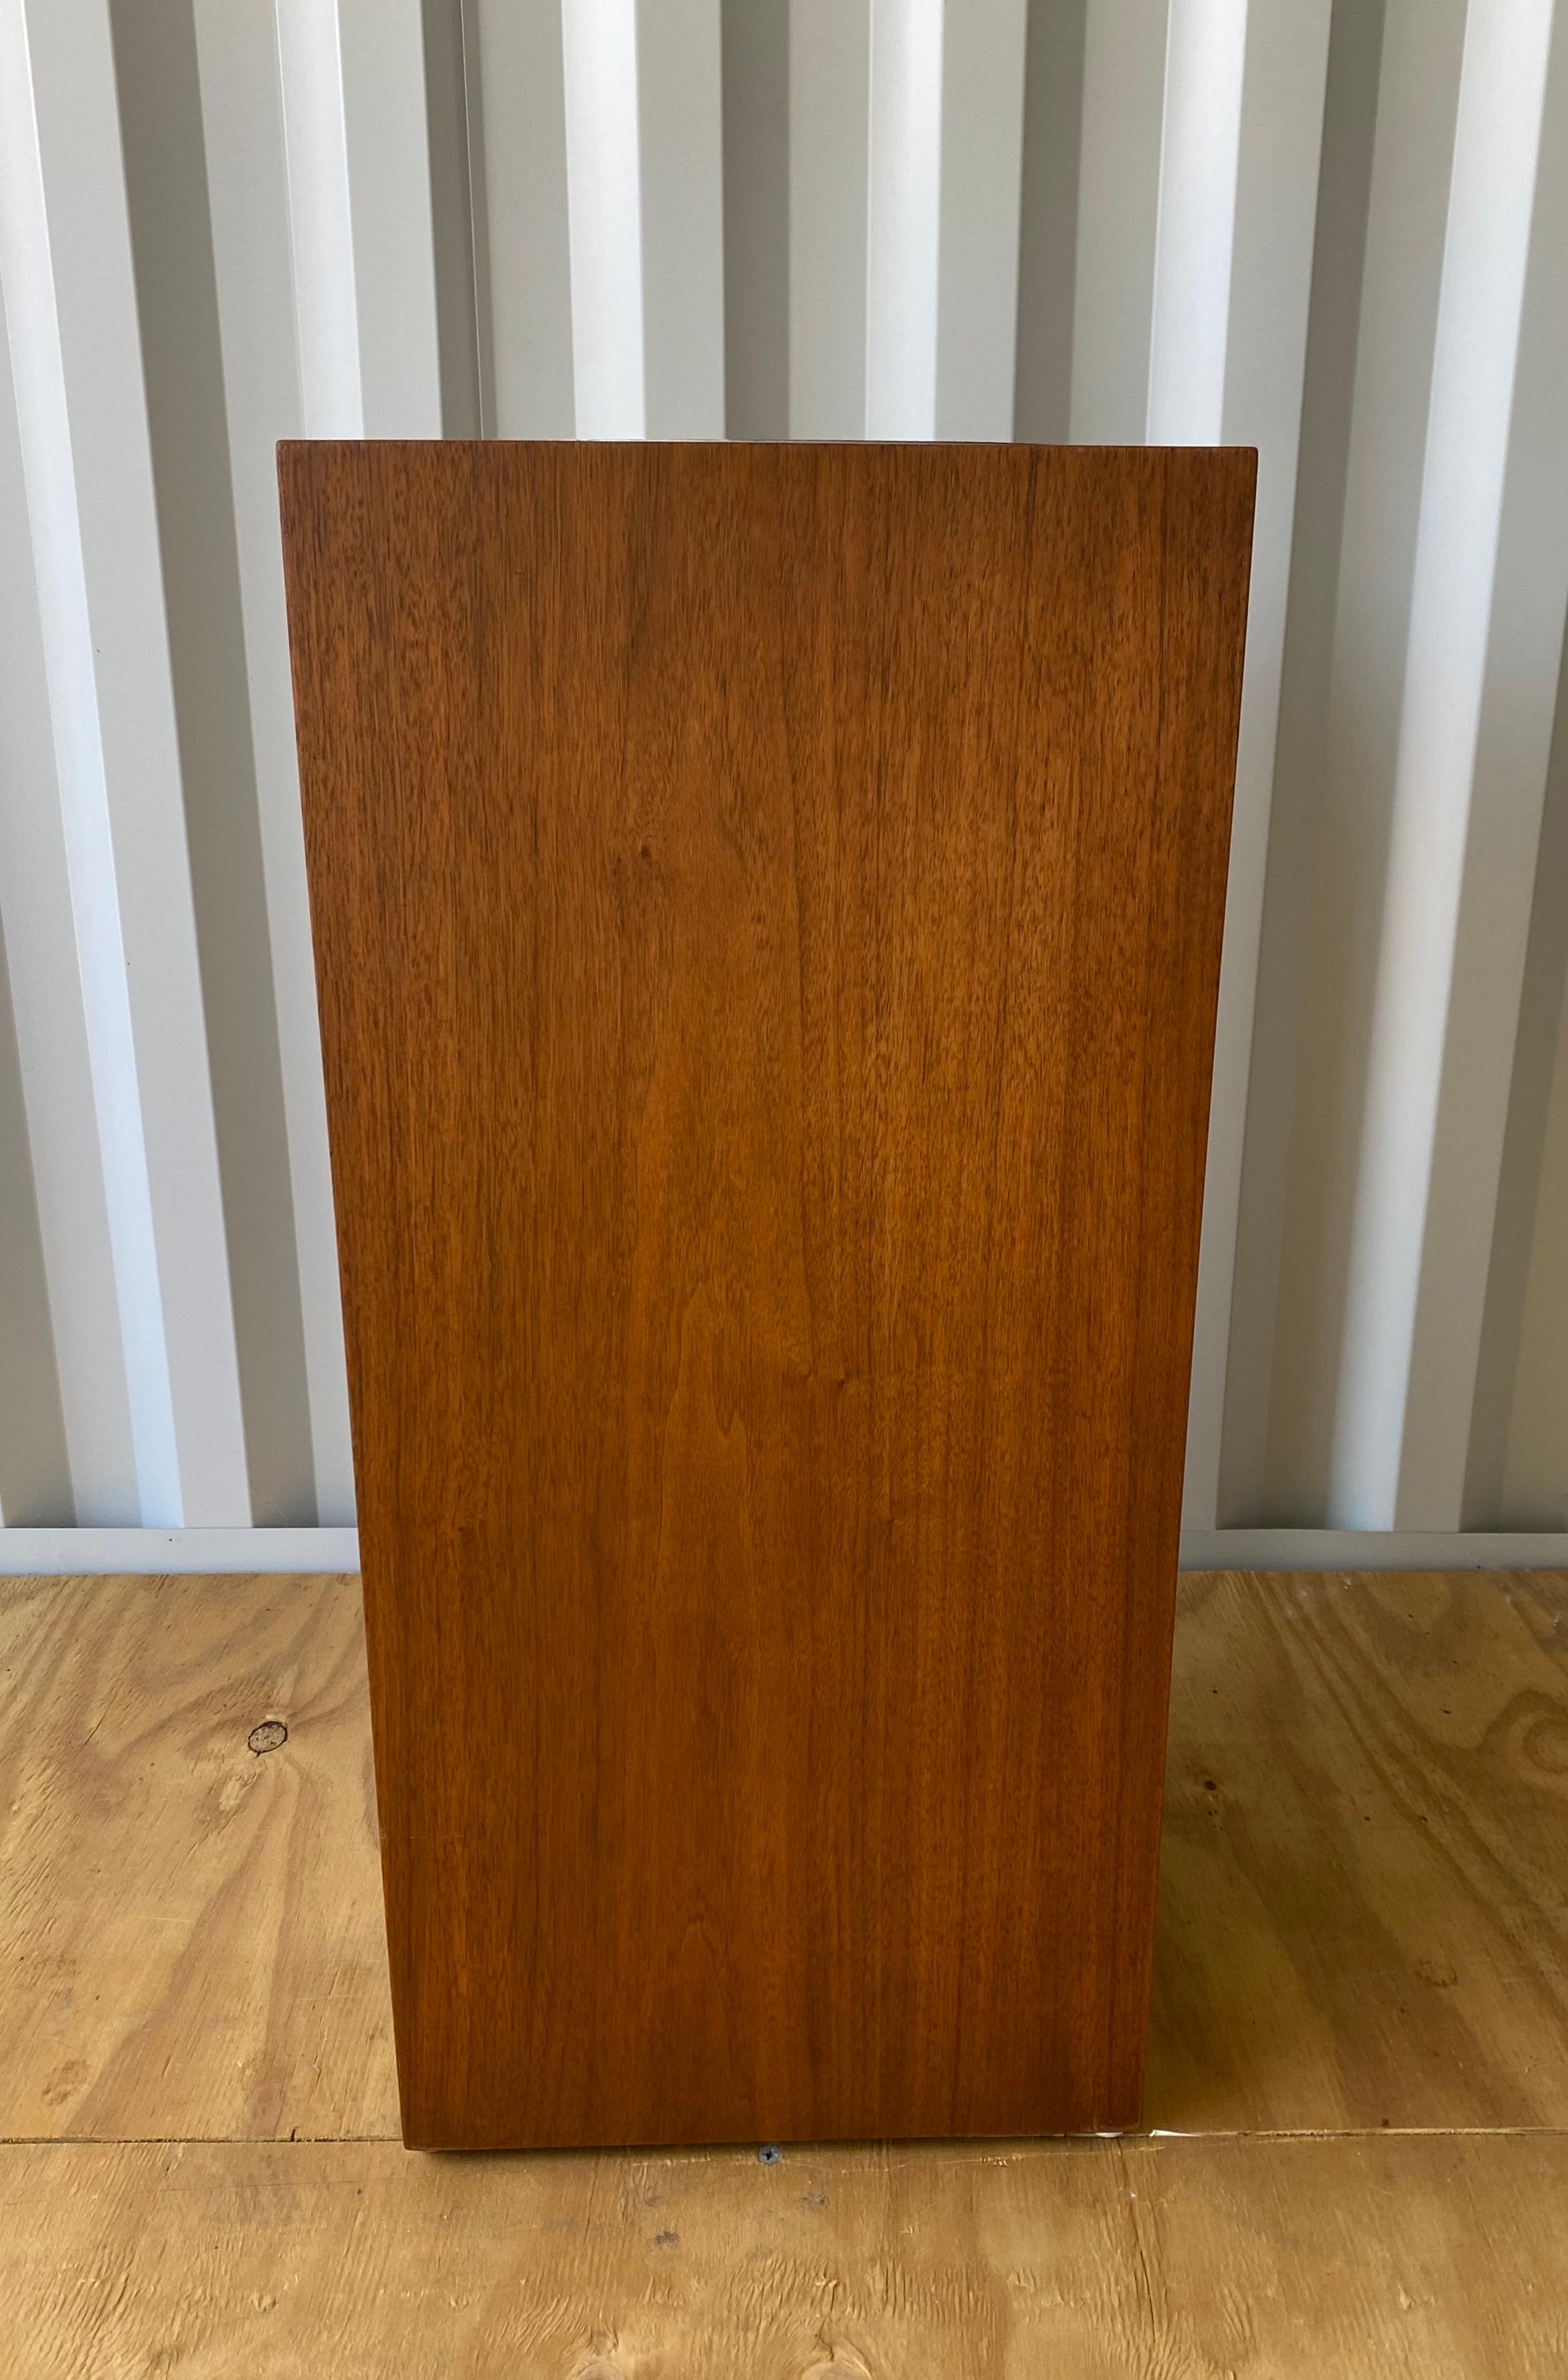 Late 20th Century Modernist Walnut and Aluminum Architectural Planters by Habitat International For Sale